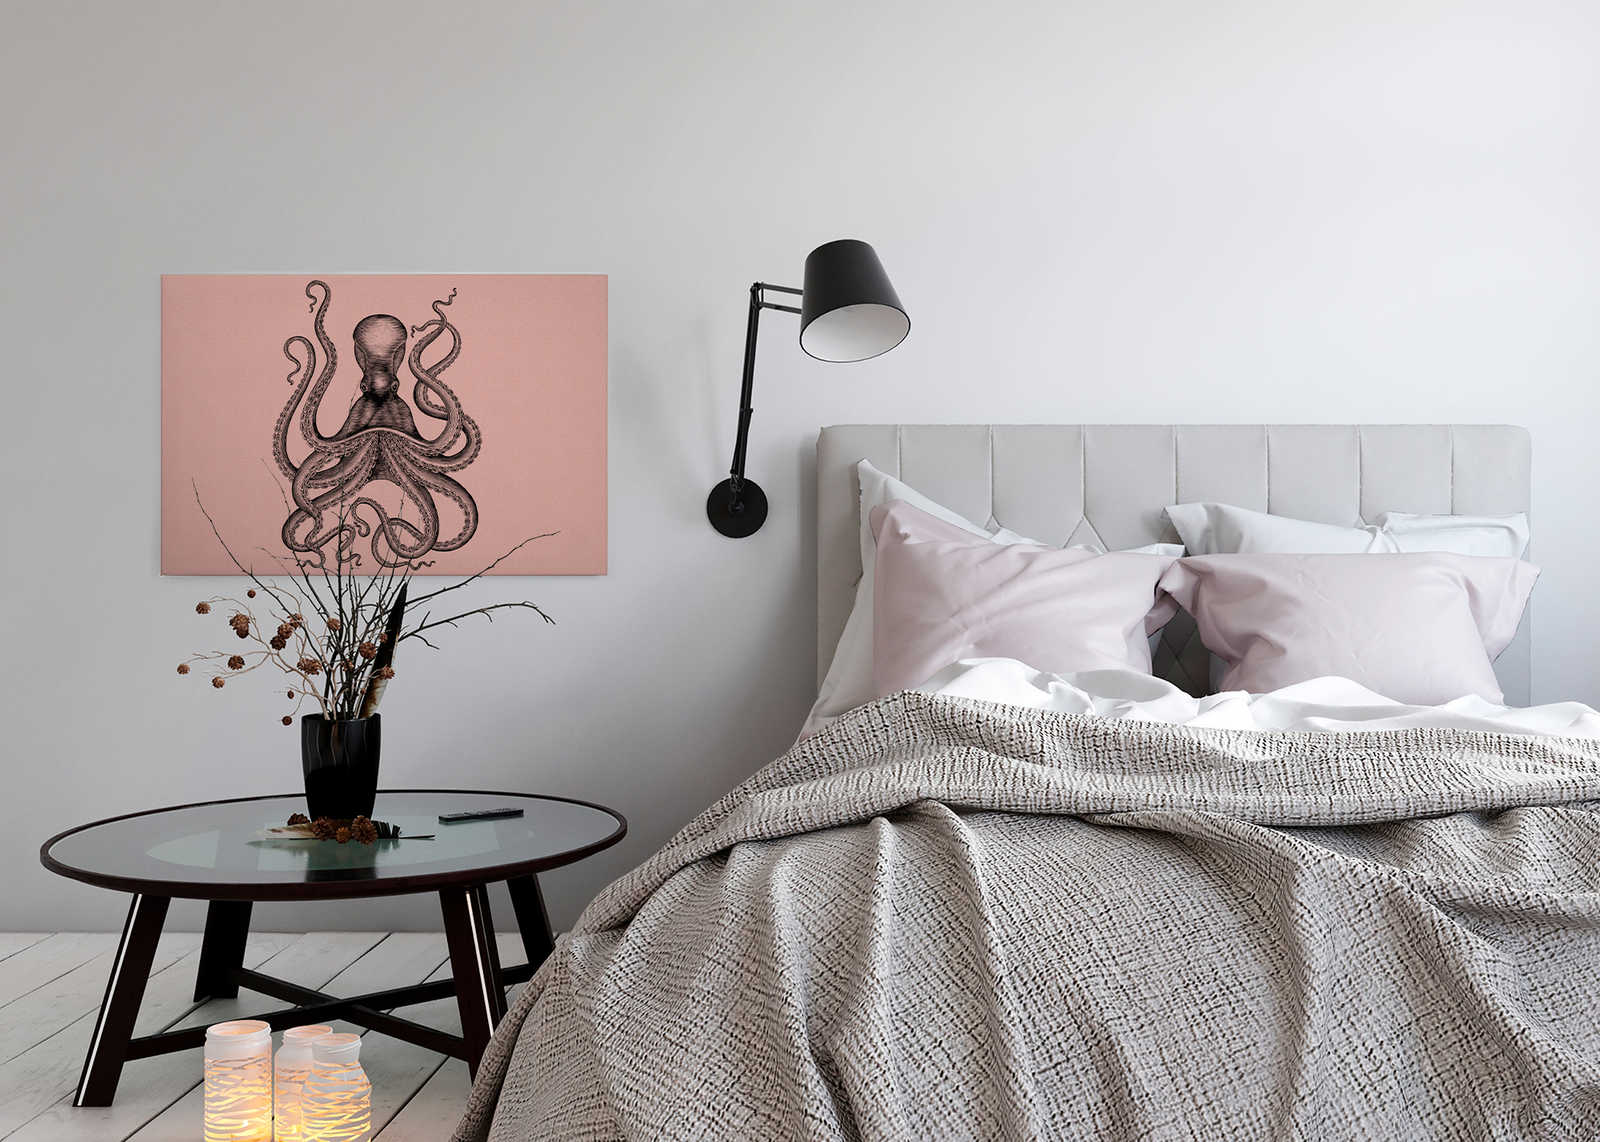             Jules 1 - Canvas painting with octopus in drawing & retro style in cardboard structure - 0.90 m x 0.60 m
        